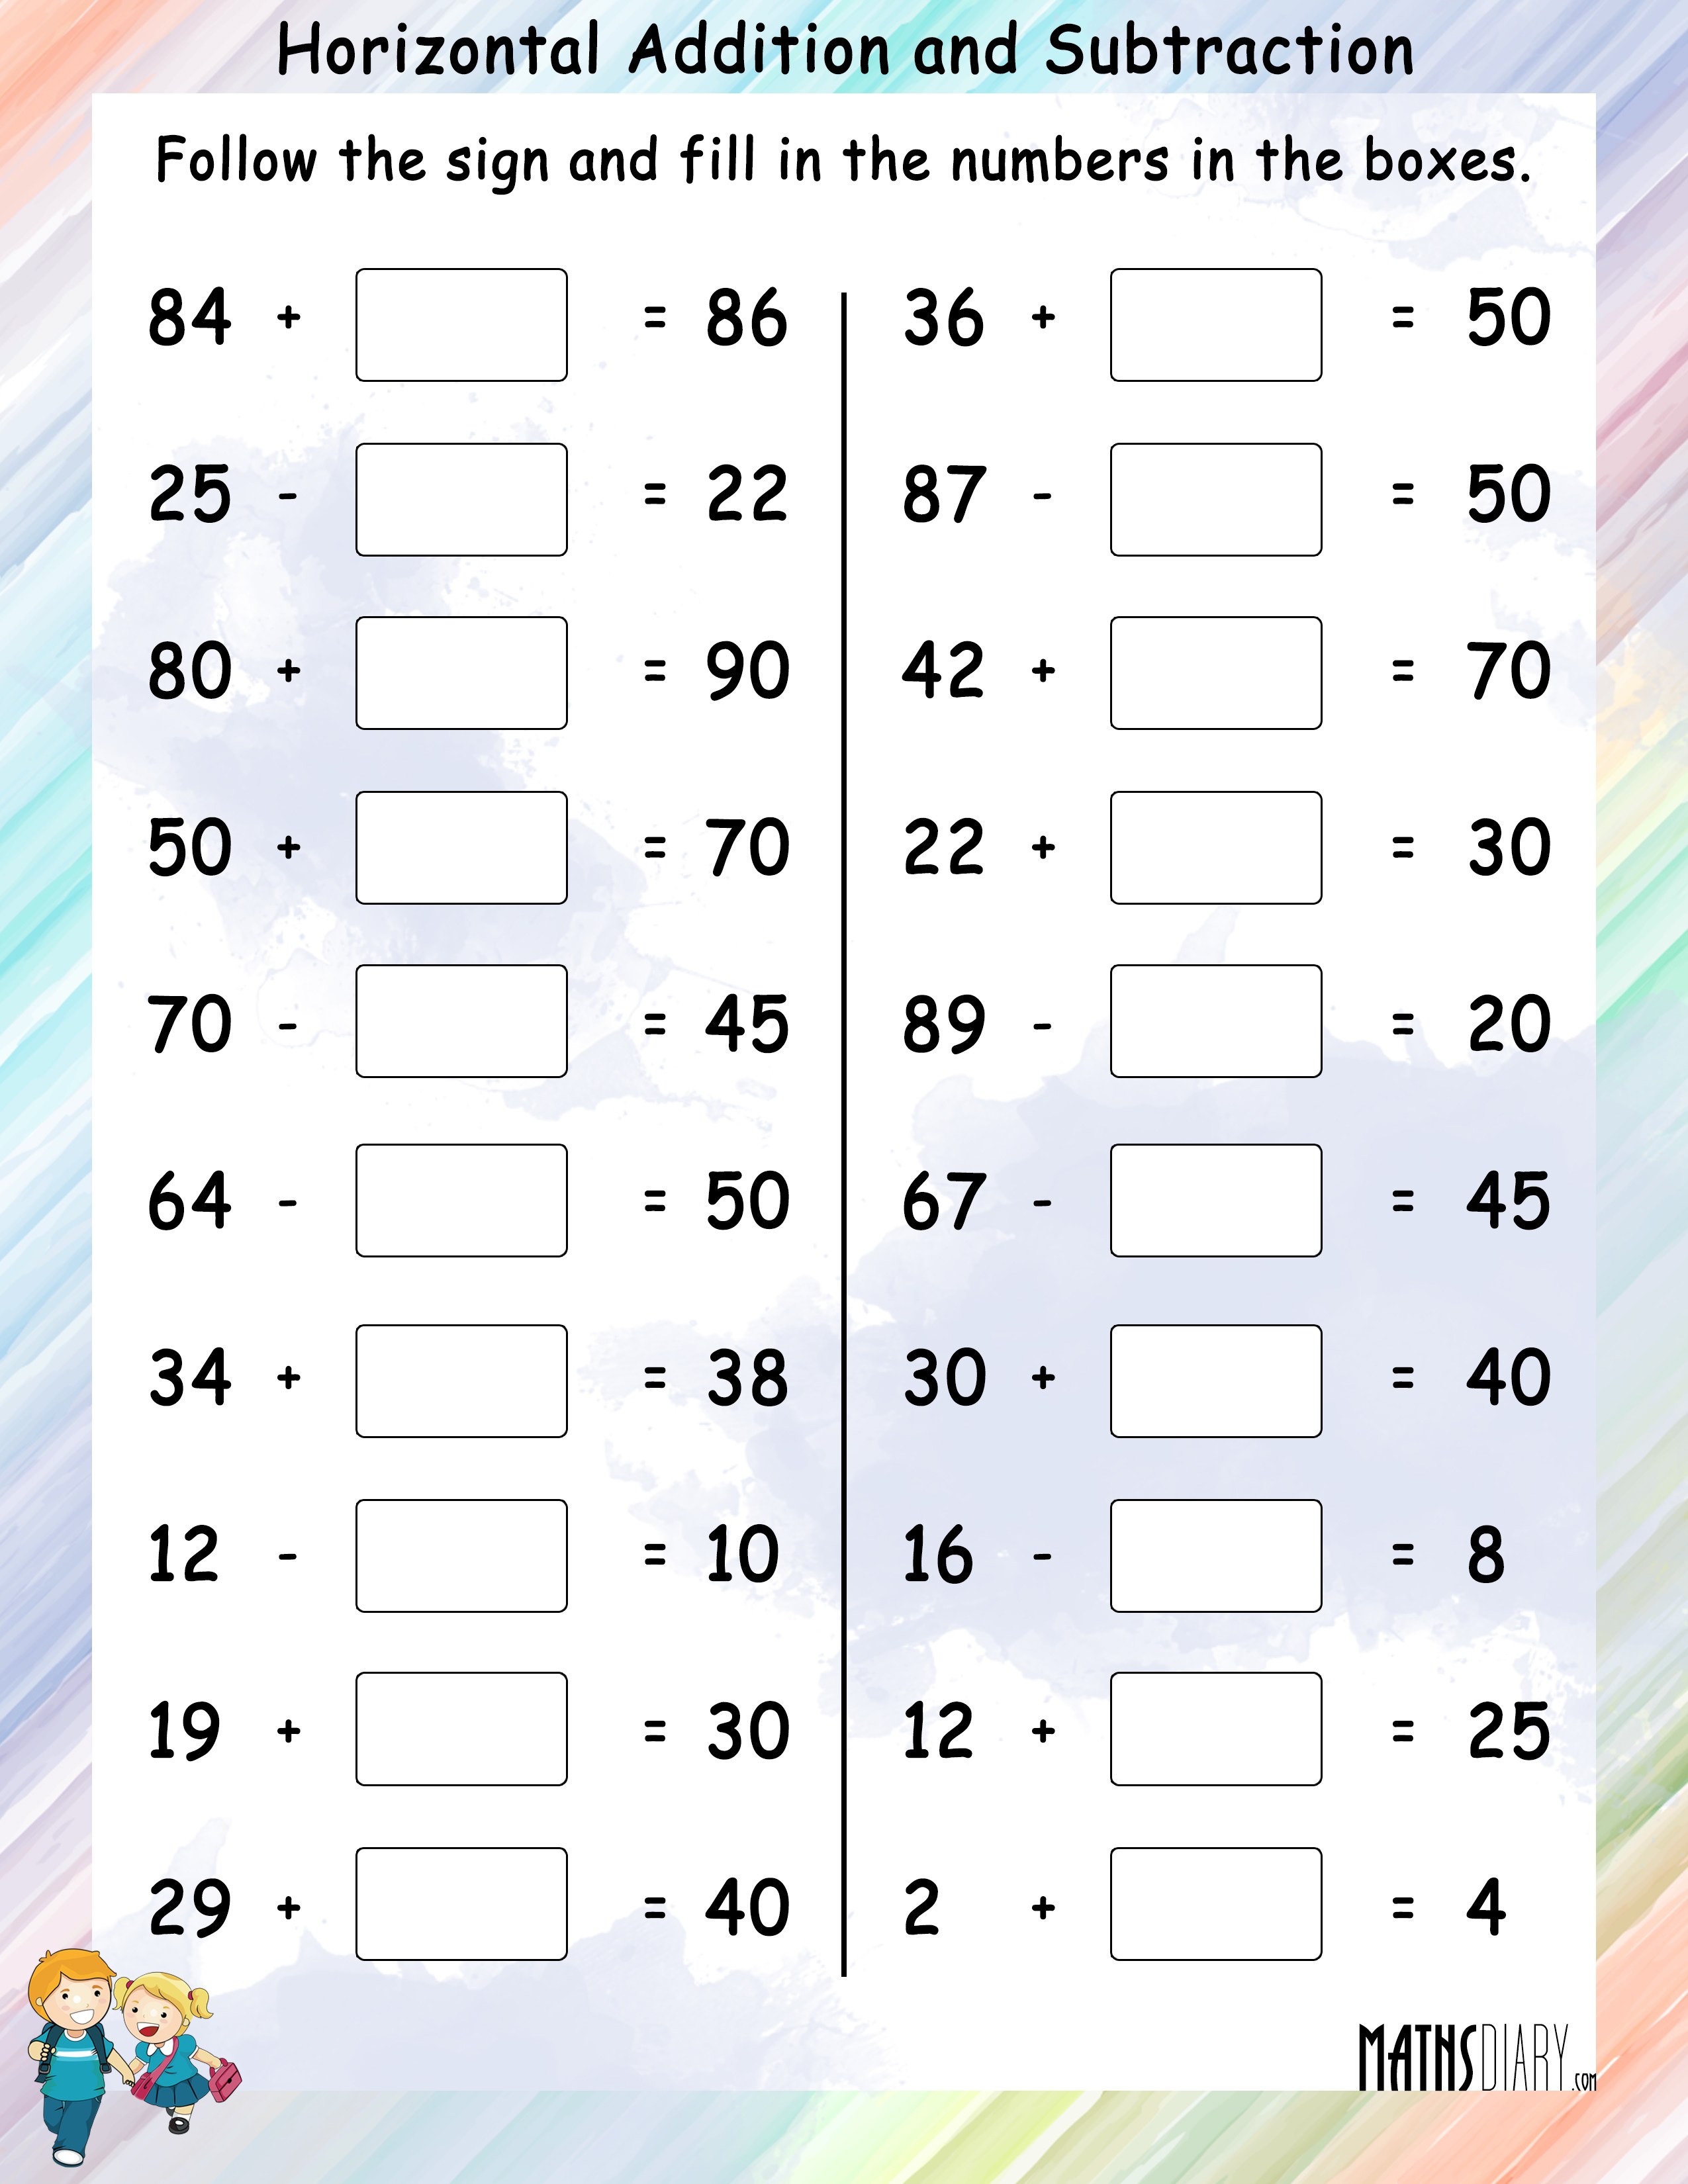 horizontal-addition-and-subtraction-math-worksheets-mathsdiary